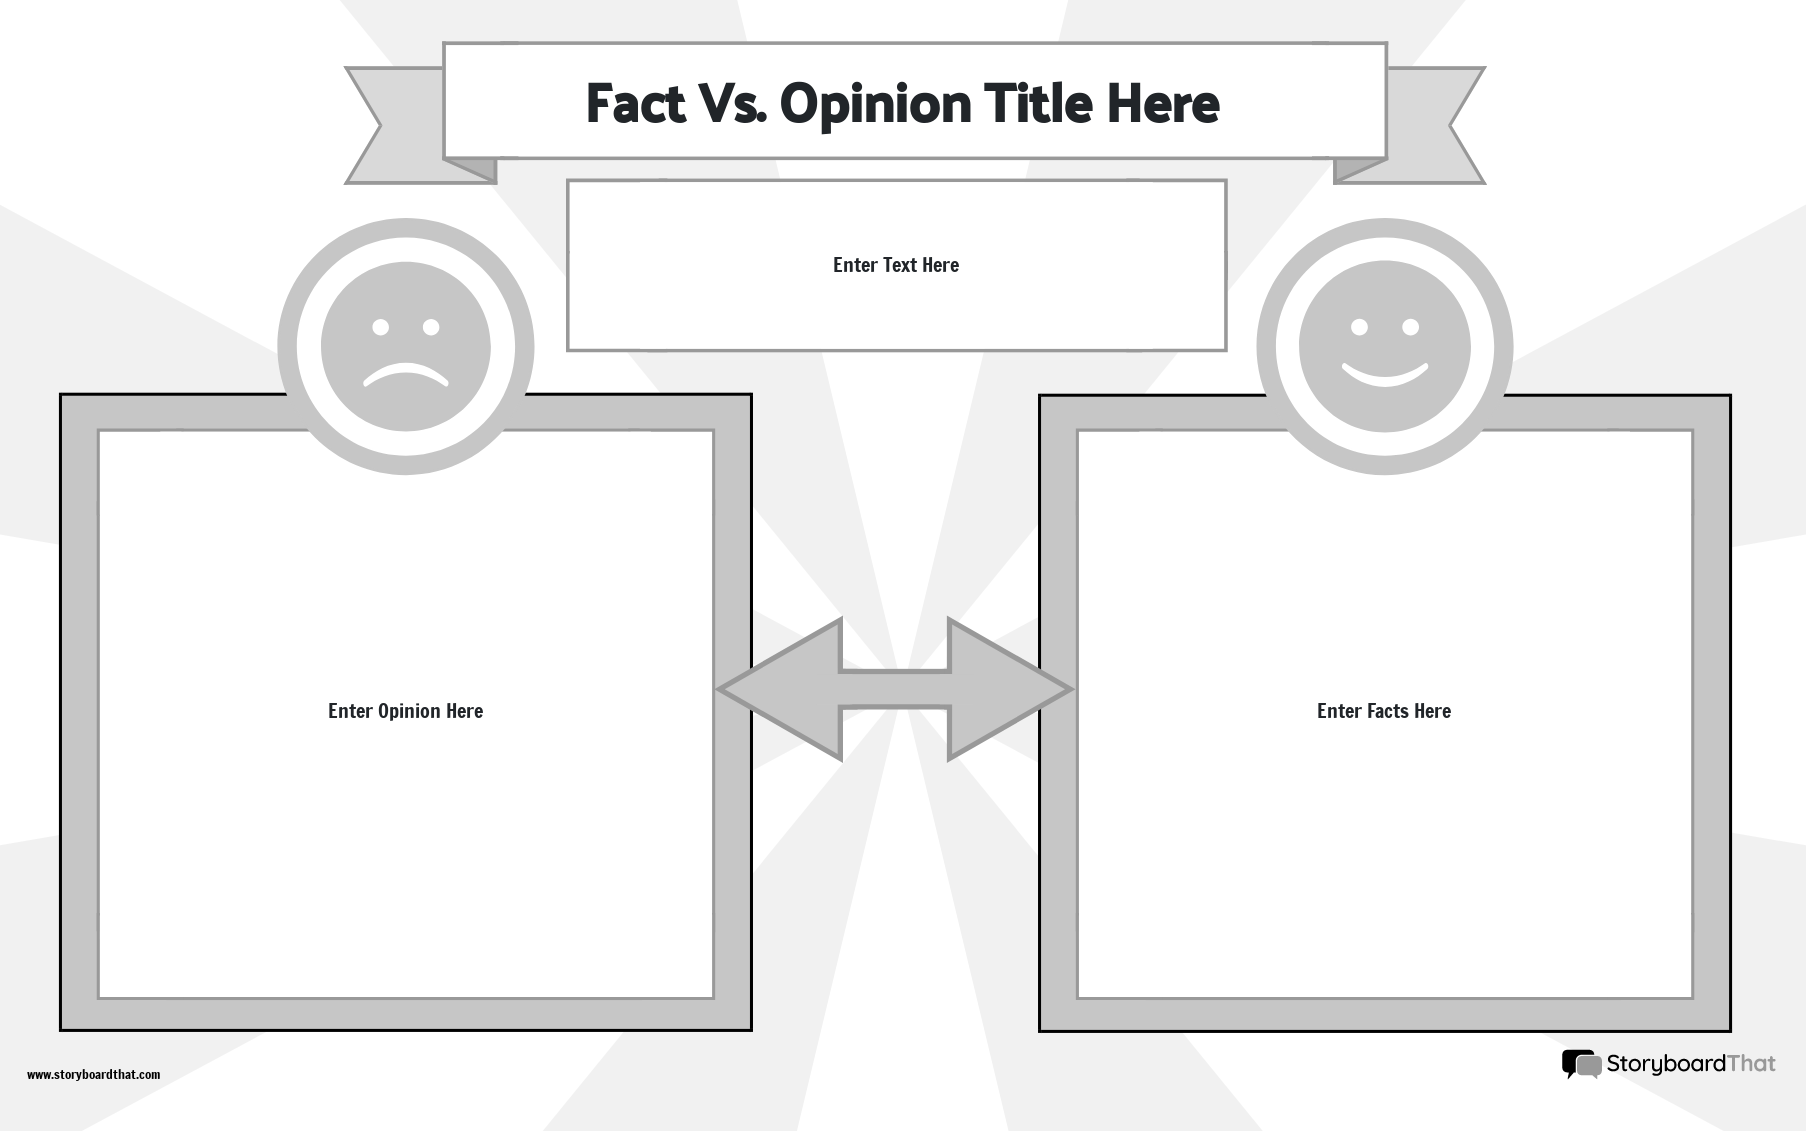 New Create Page Fact vs. Opinion Template 5 (Black & White)